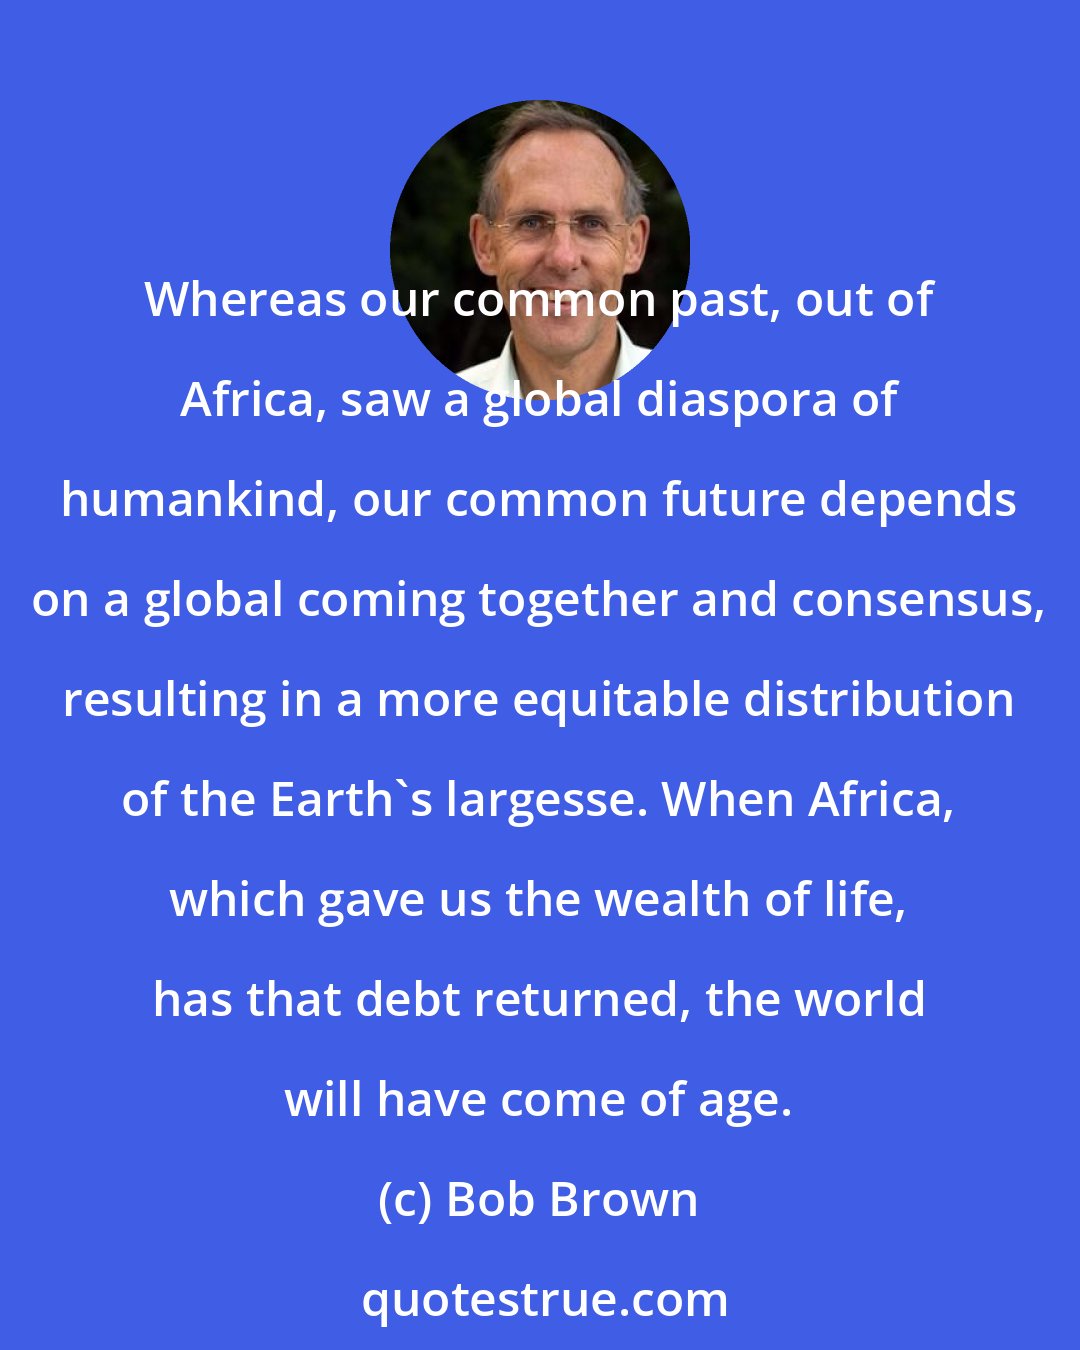 Bob Brown: Whereas our common past, out of Africa, saw a global diaspora of humankind, our common future depends on a global coming together and consensus, resulting in a more equitable distribution of the Earth's largesse. When Africa, which gave us the wealth of life, has that debt returned, the world will have come of age.